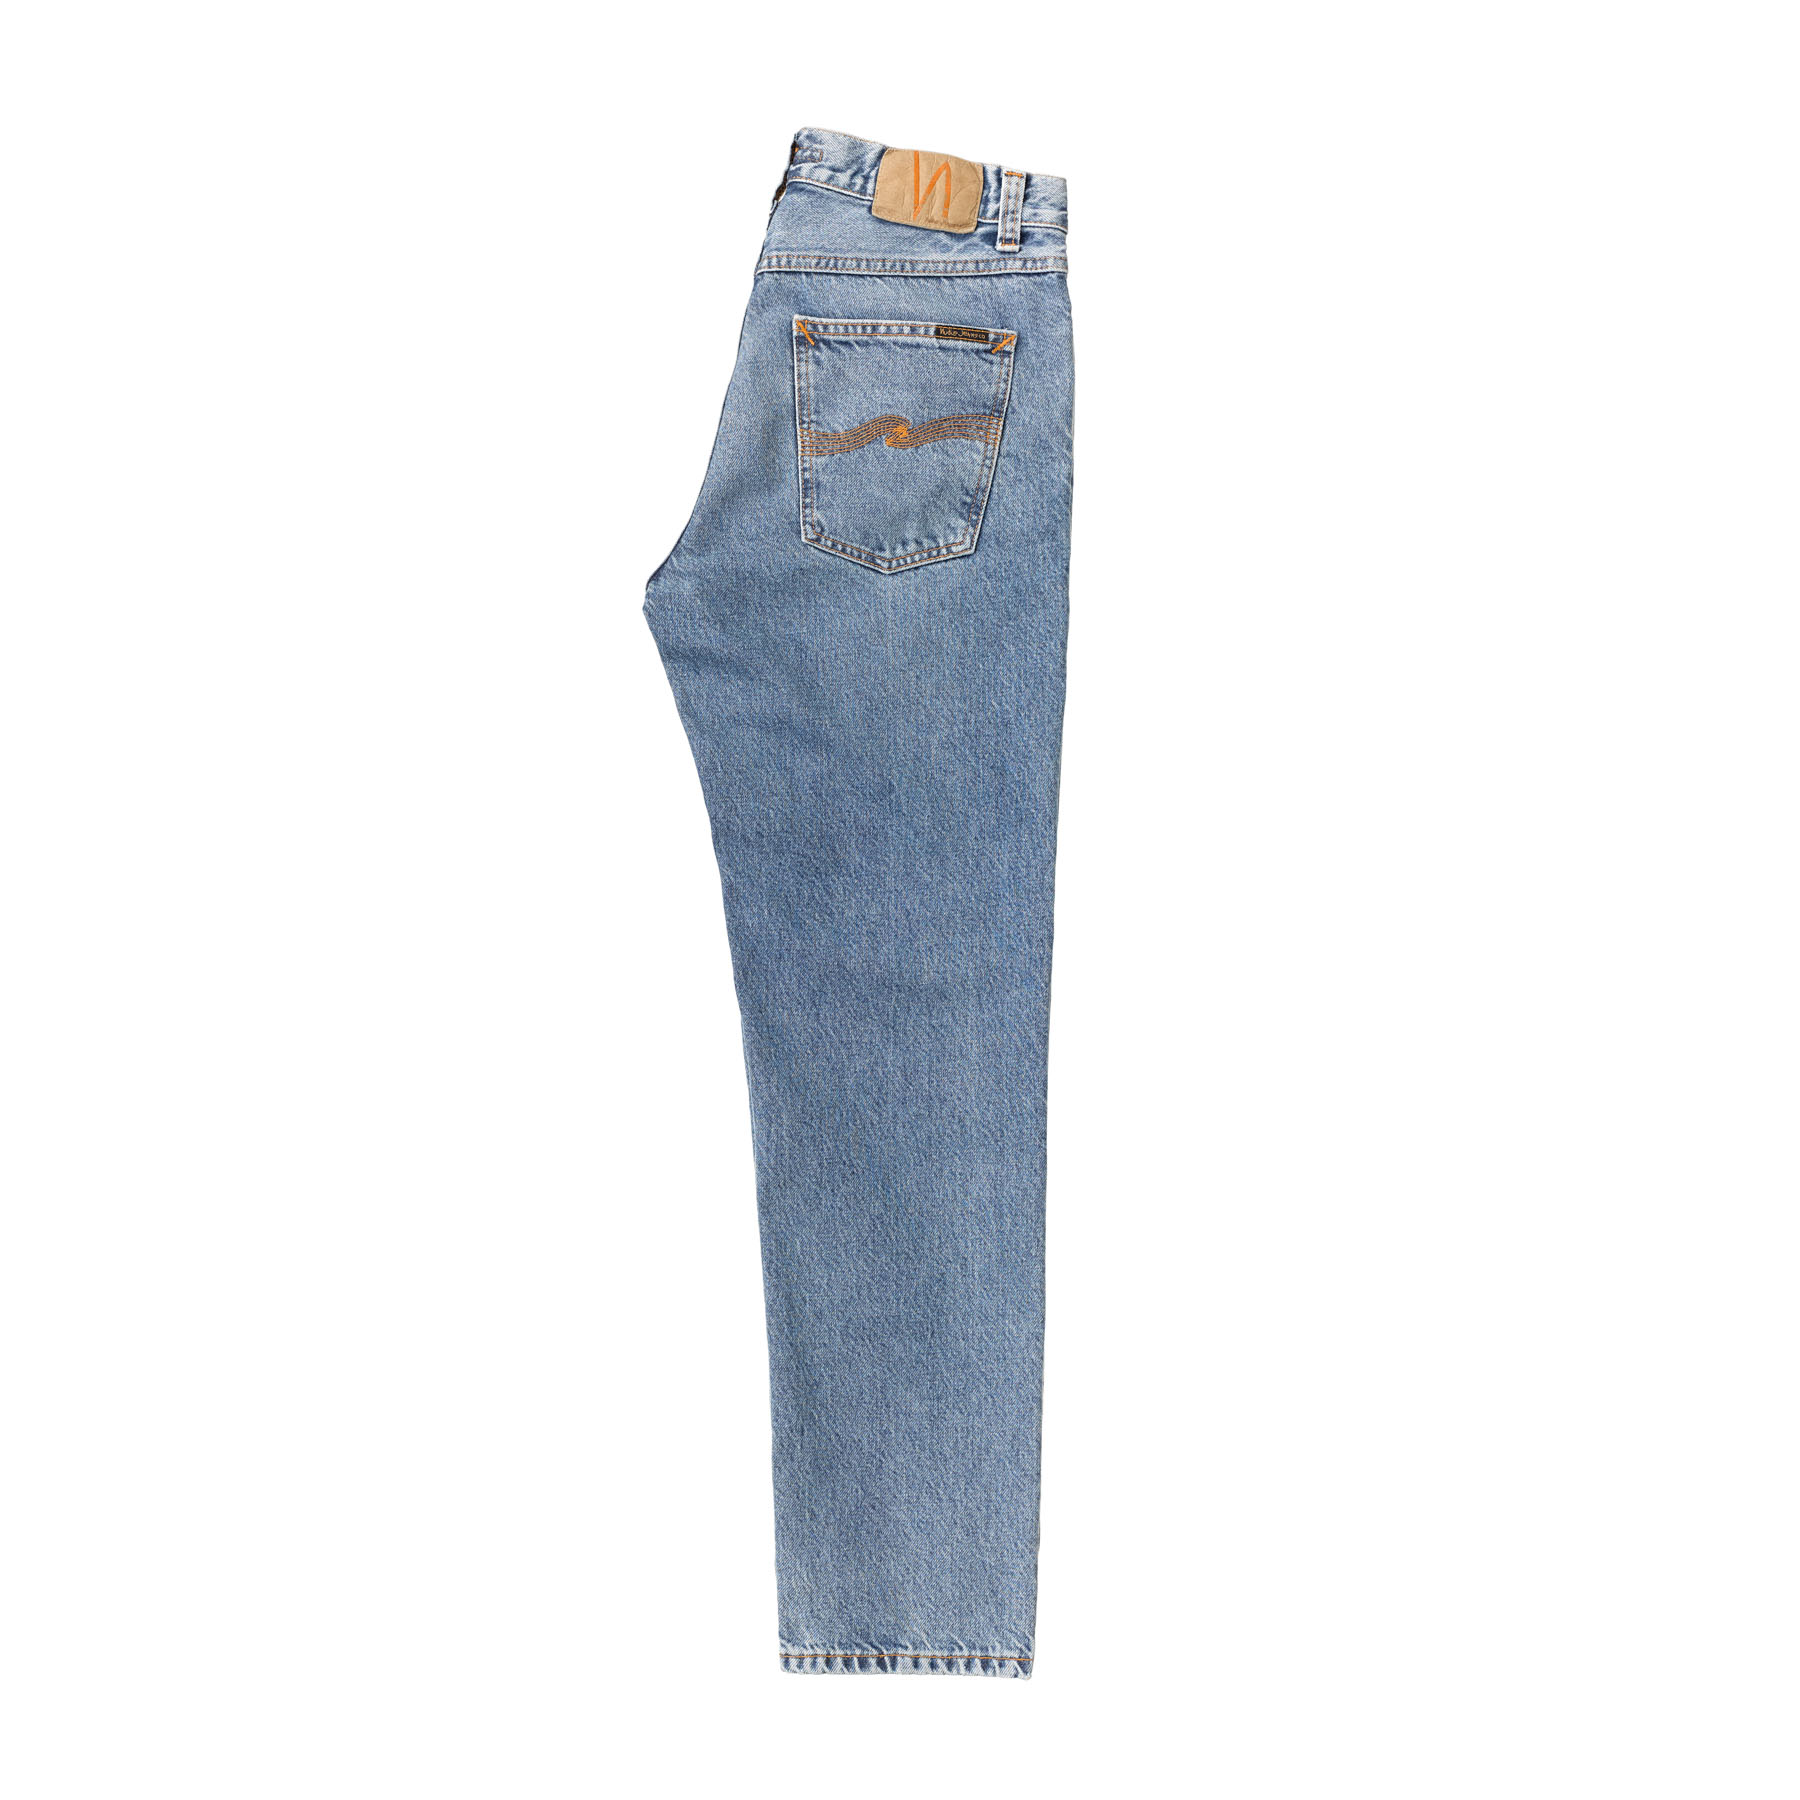 NUDIE JEANS Jeans Gritty Jackson blue traces 33/32